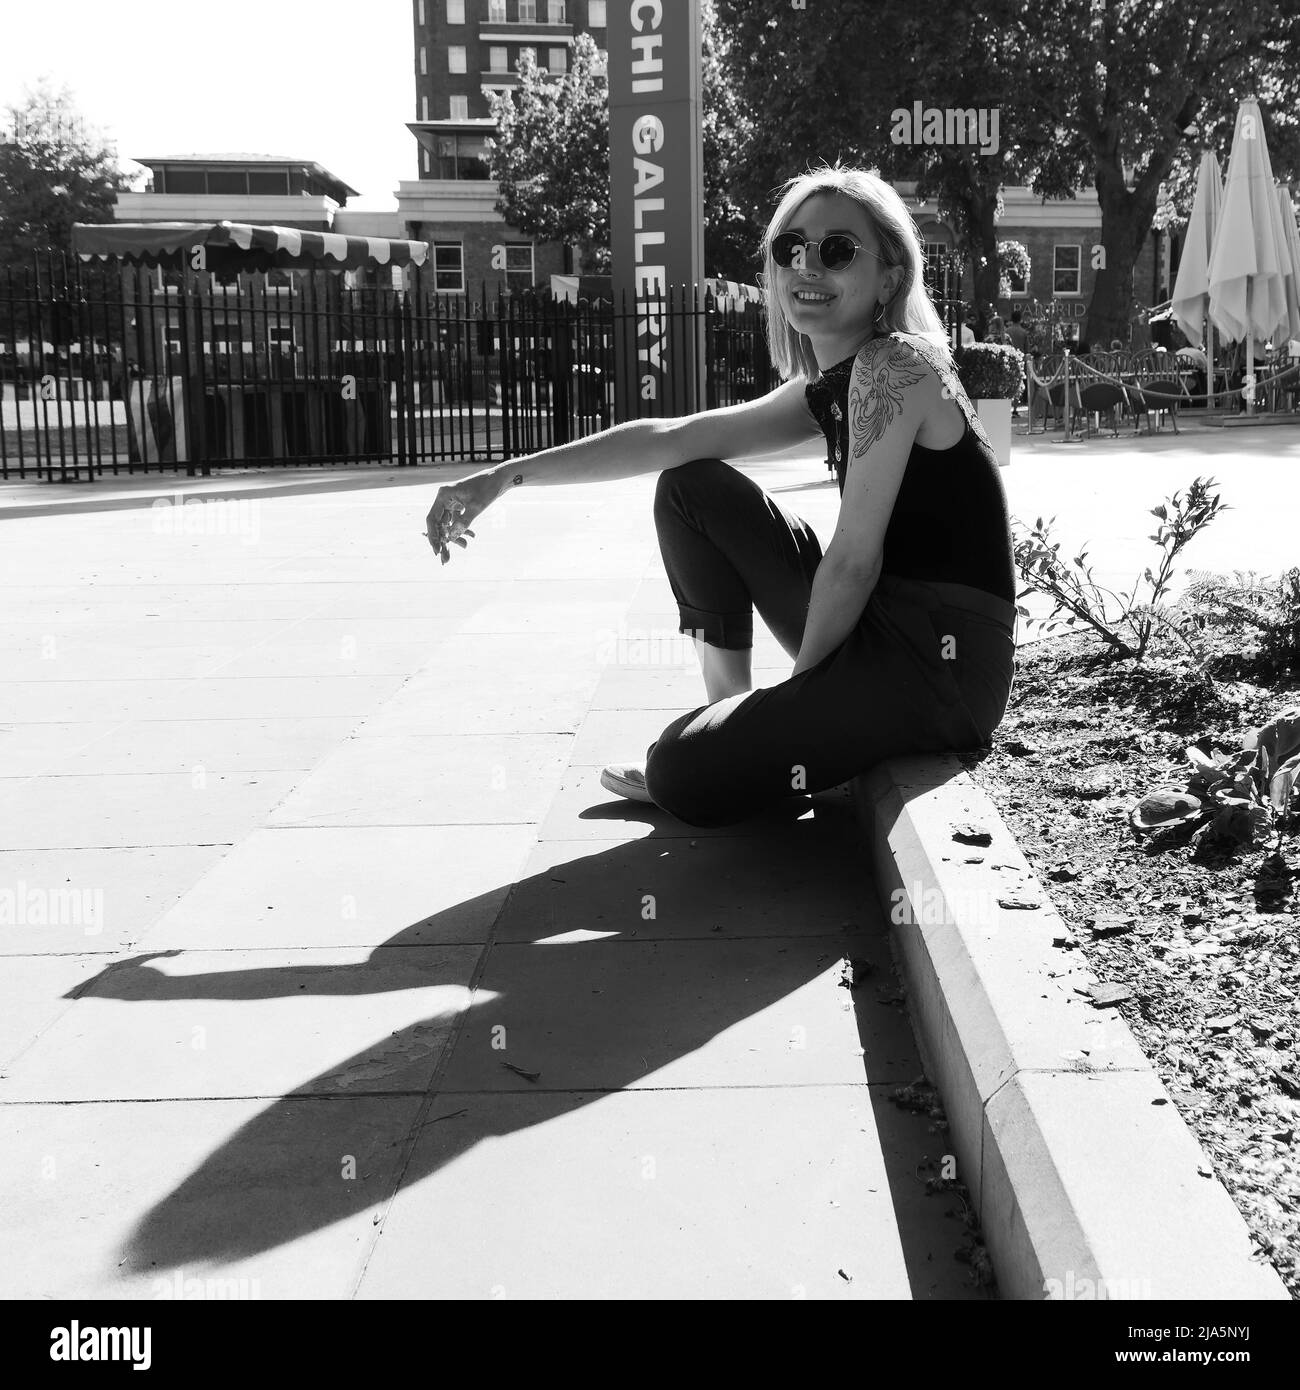 Pretty lady with tattoos, nose piercing and sunglasses sits on a curb stone, smiles and smokes. Duke of York Square, Chelsea, London. Monochrome. Stock Photo